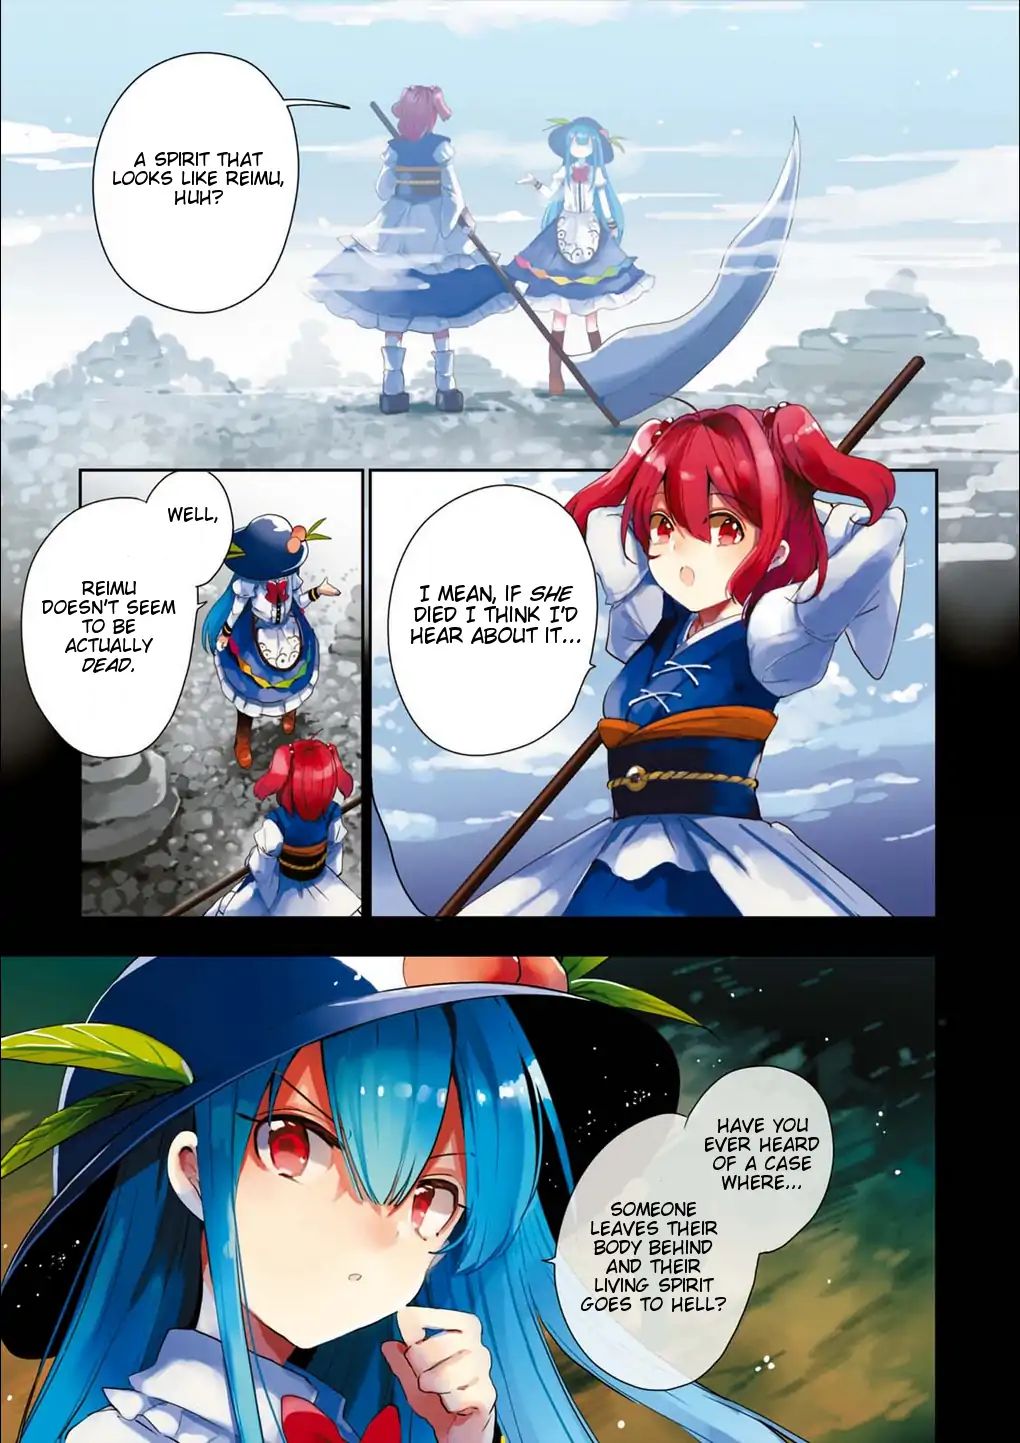 Touhou Ibarakasen - Wild and Horned Hermit Vol.10 Chapter 48: Not Stopping To Ask For Direction In The Land Of Darkness